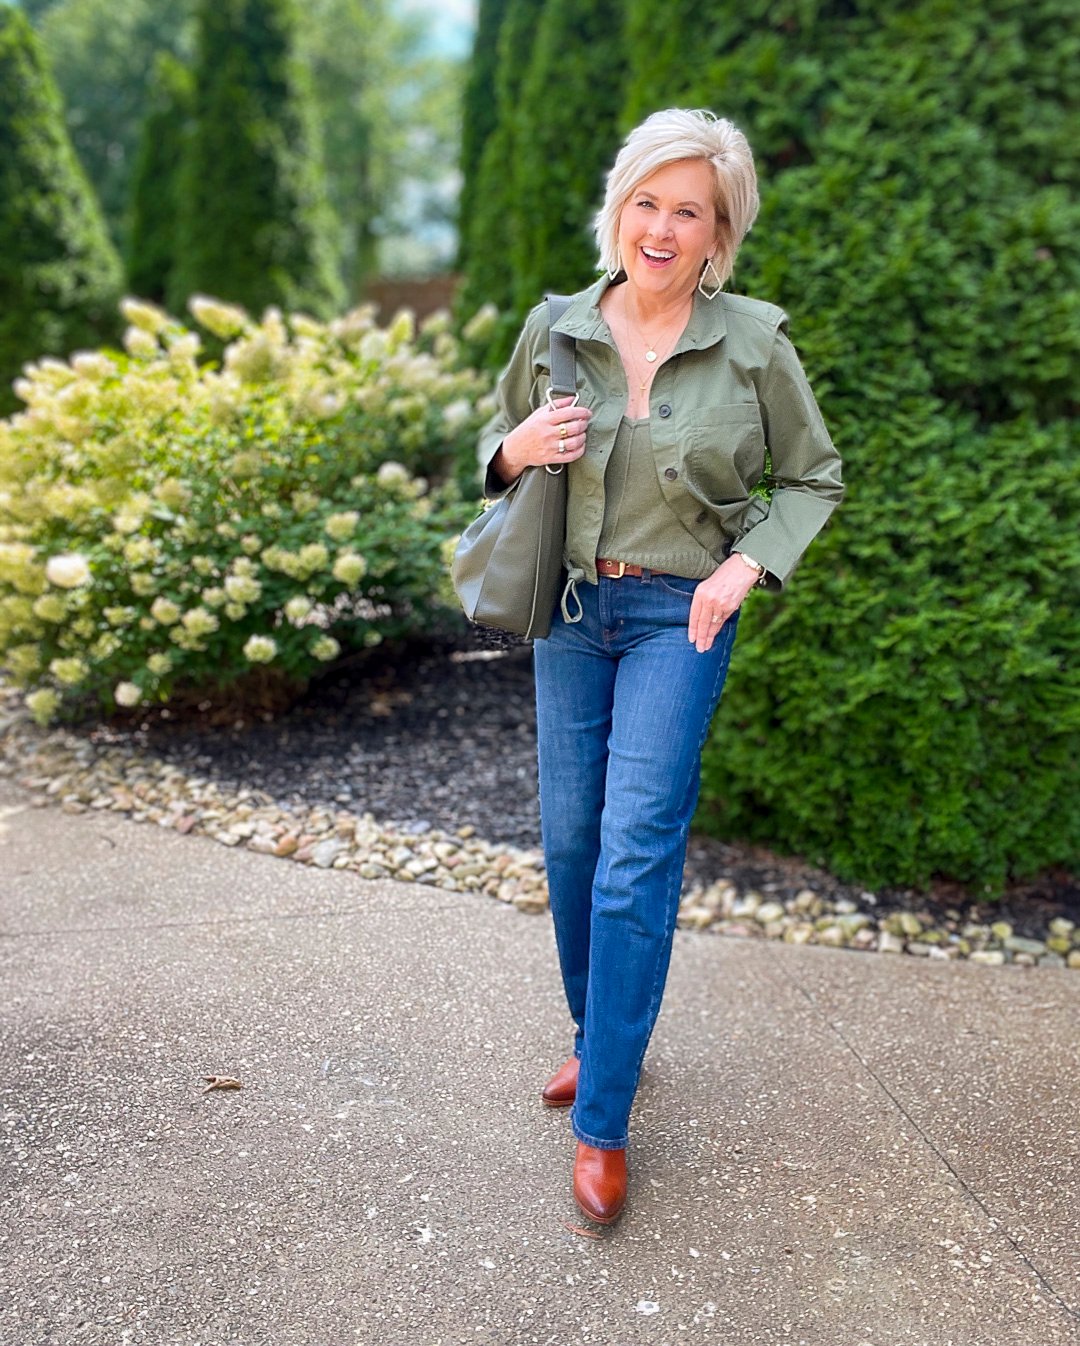 Over 40 Fashion Blogger, Tania Stephens is wearing an olive green jacket and sweater tank from Banana Republic7